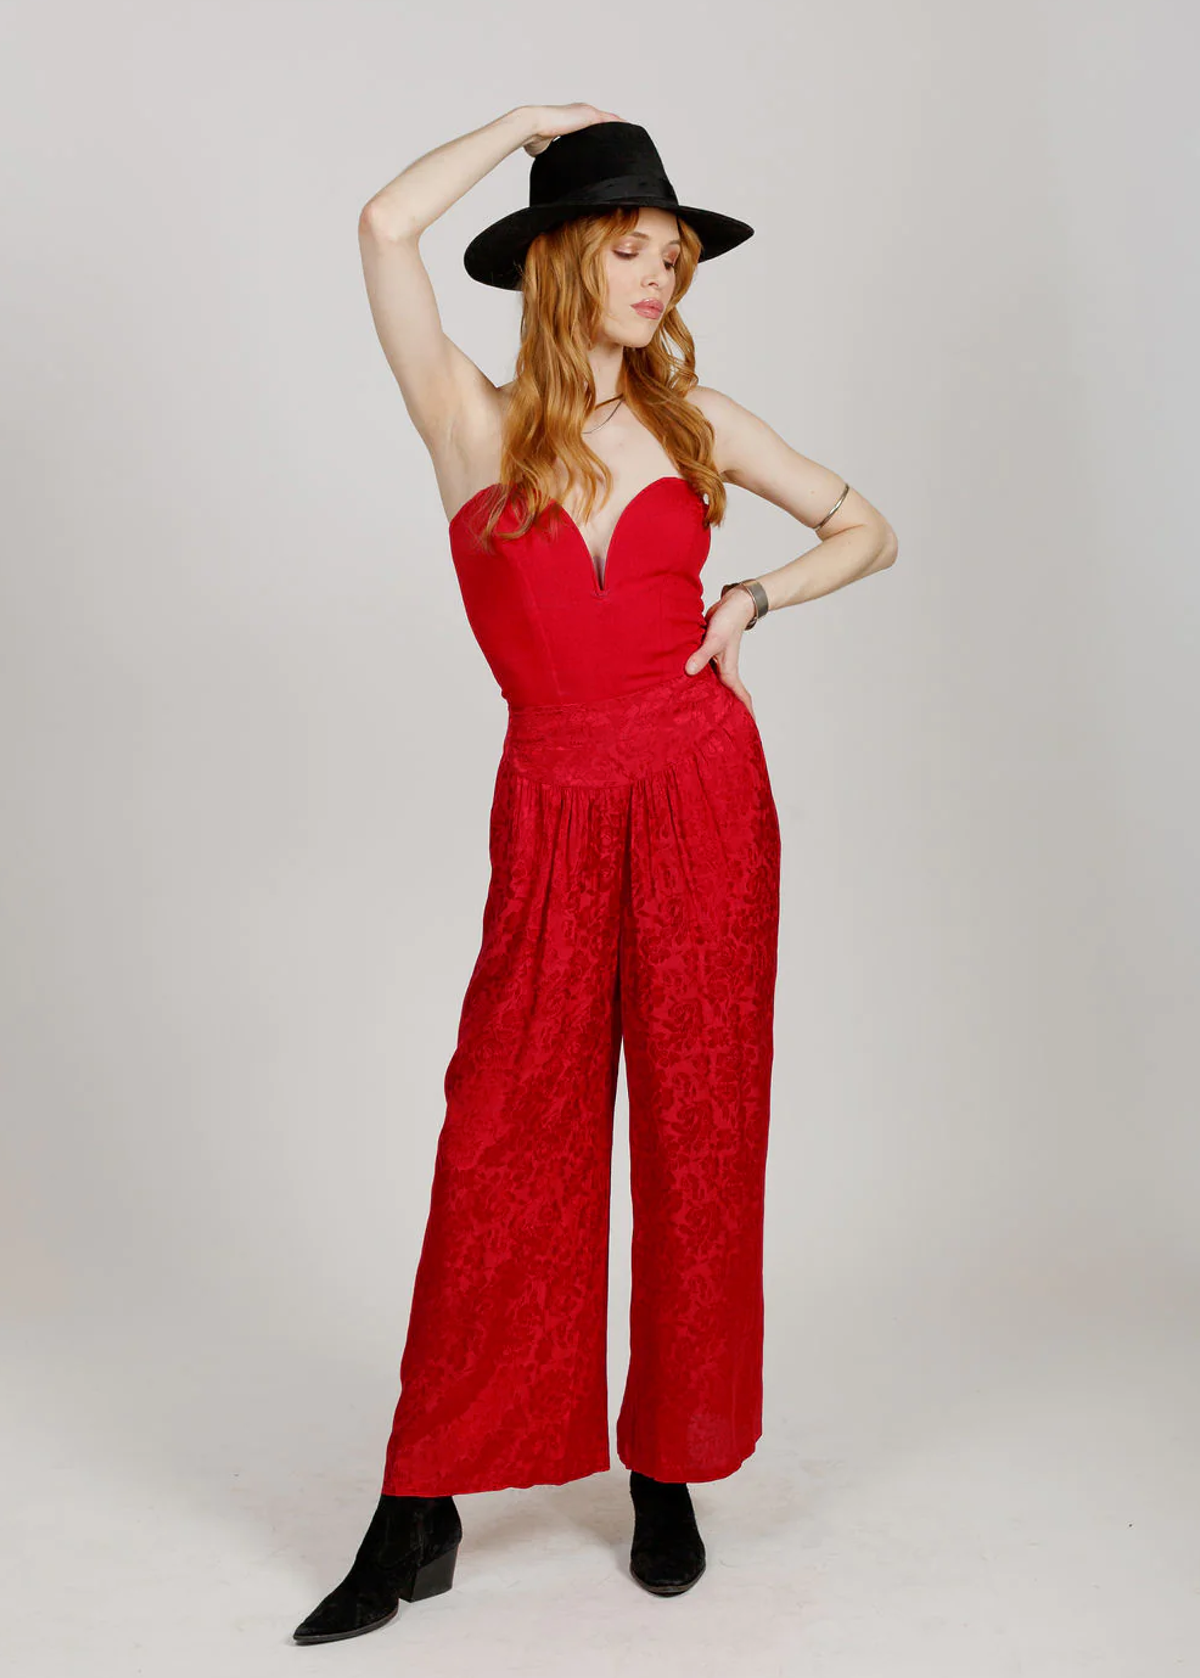 80s inspired ruby red satin wide leg pants with a wide waistband, elastic back of waist, and tonal floral pattern throughout